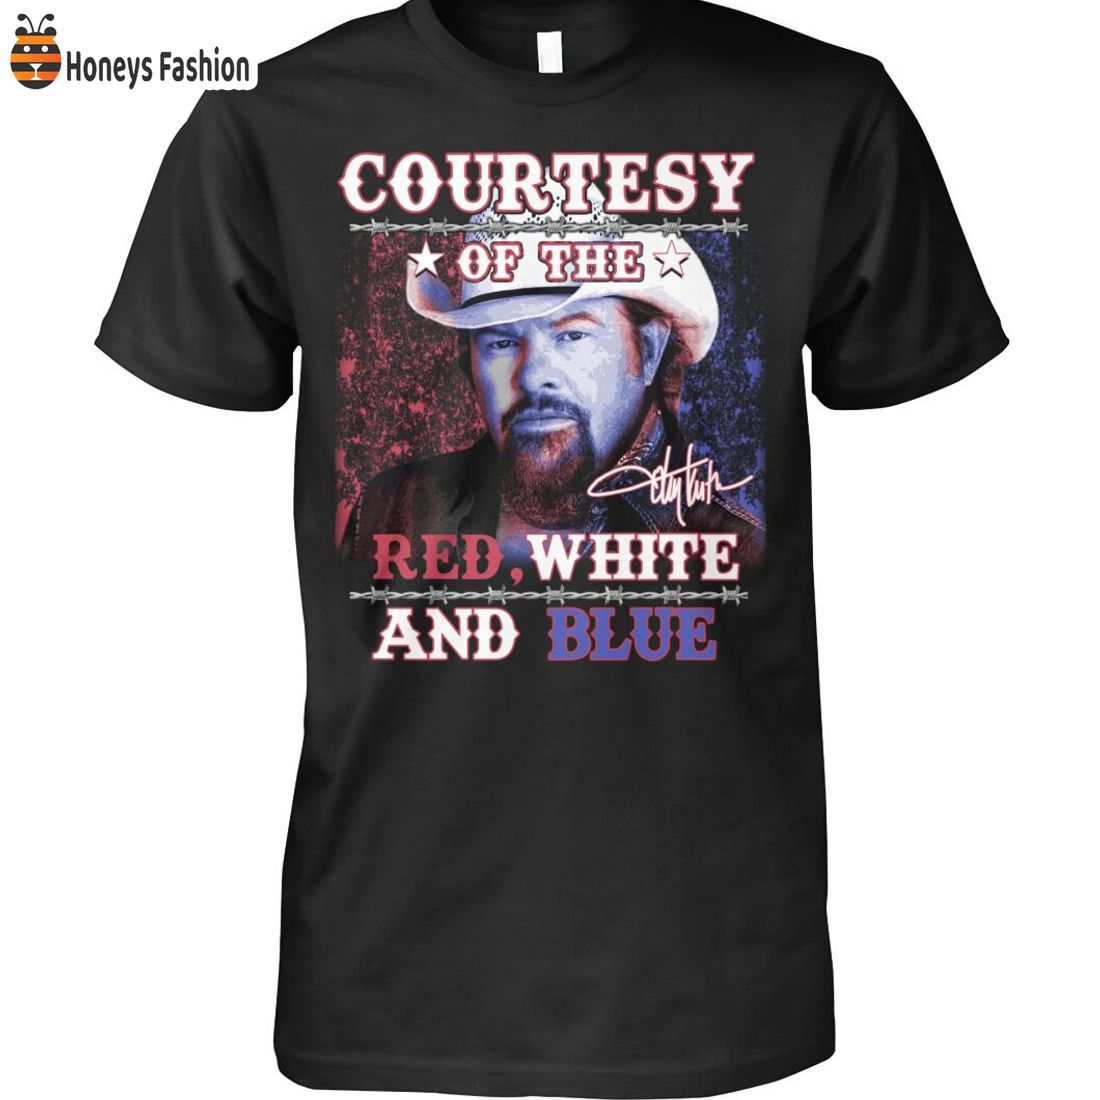 BEST SELLER Toby Keith Courtesy Of The Red White And Blue Shirt